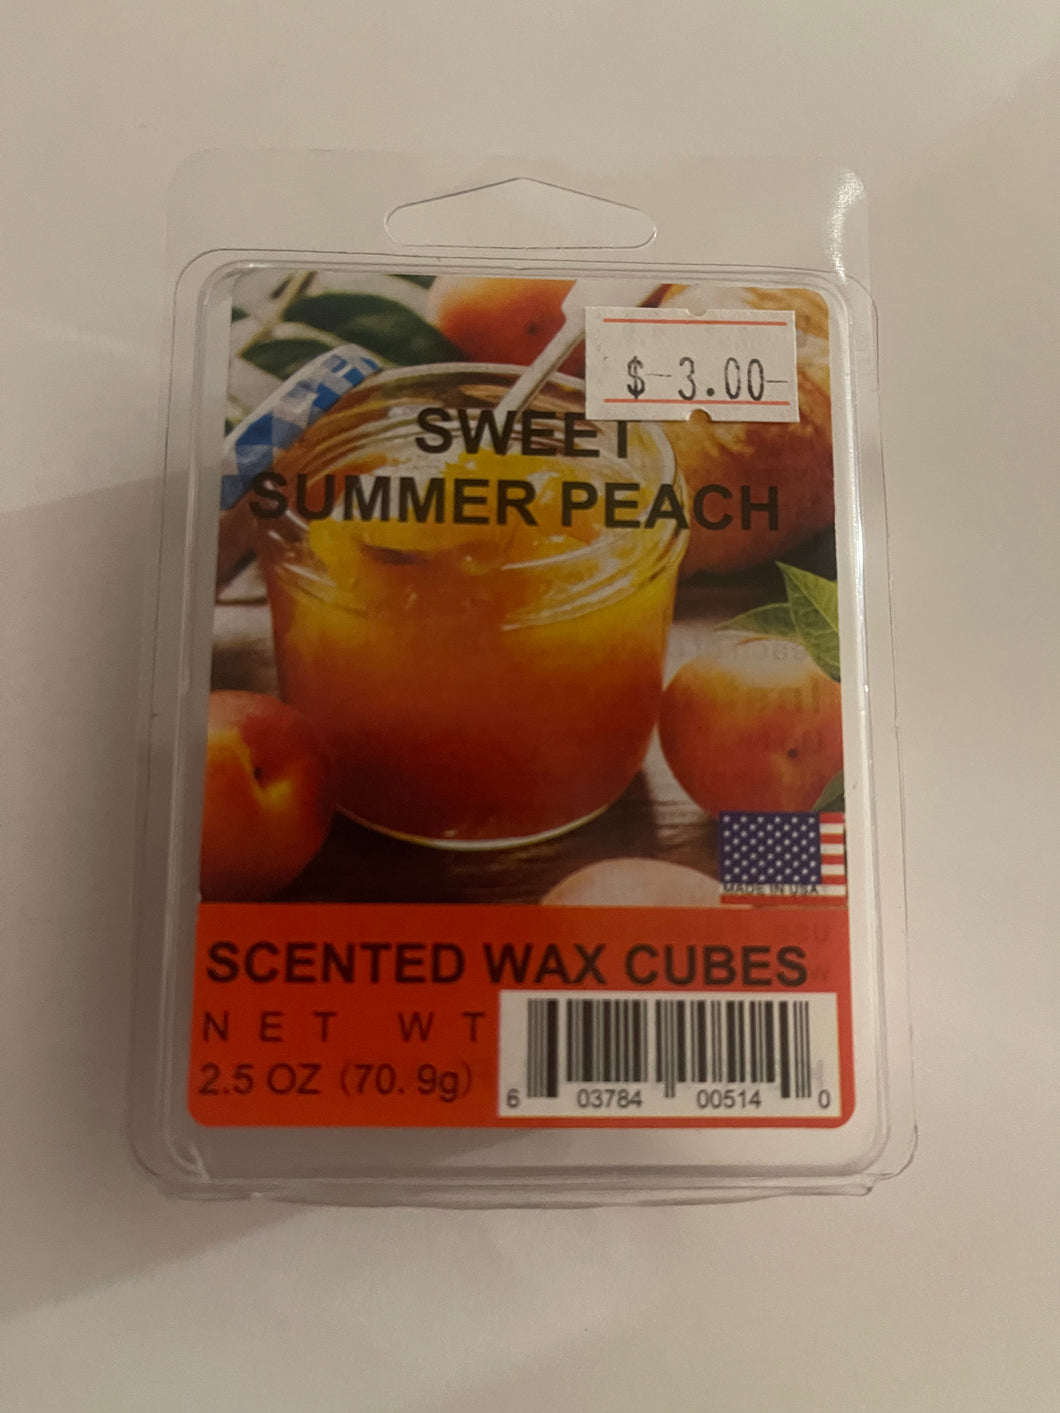 Scented wax